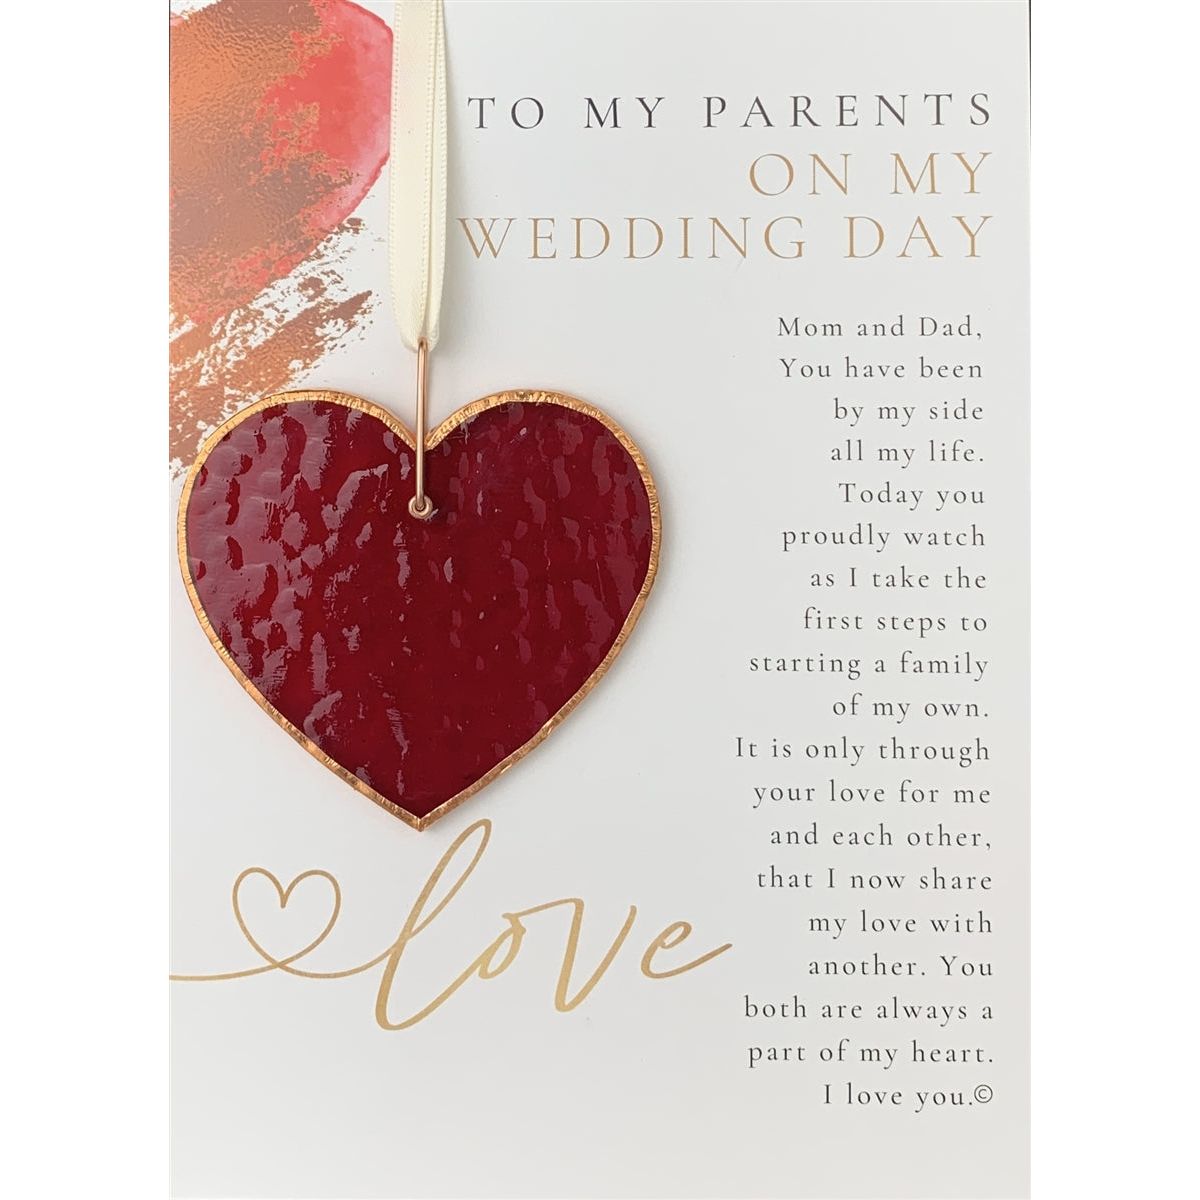 To My Parents on My Wedding Day: Glass Wedding Heart